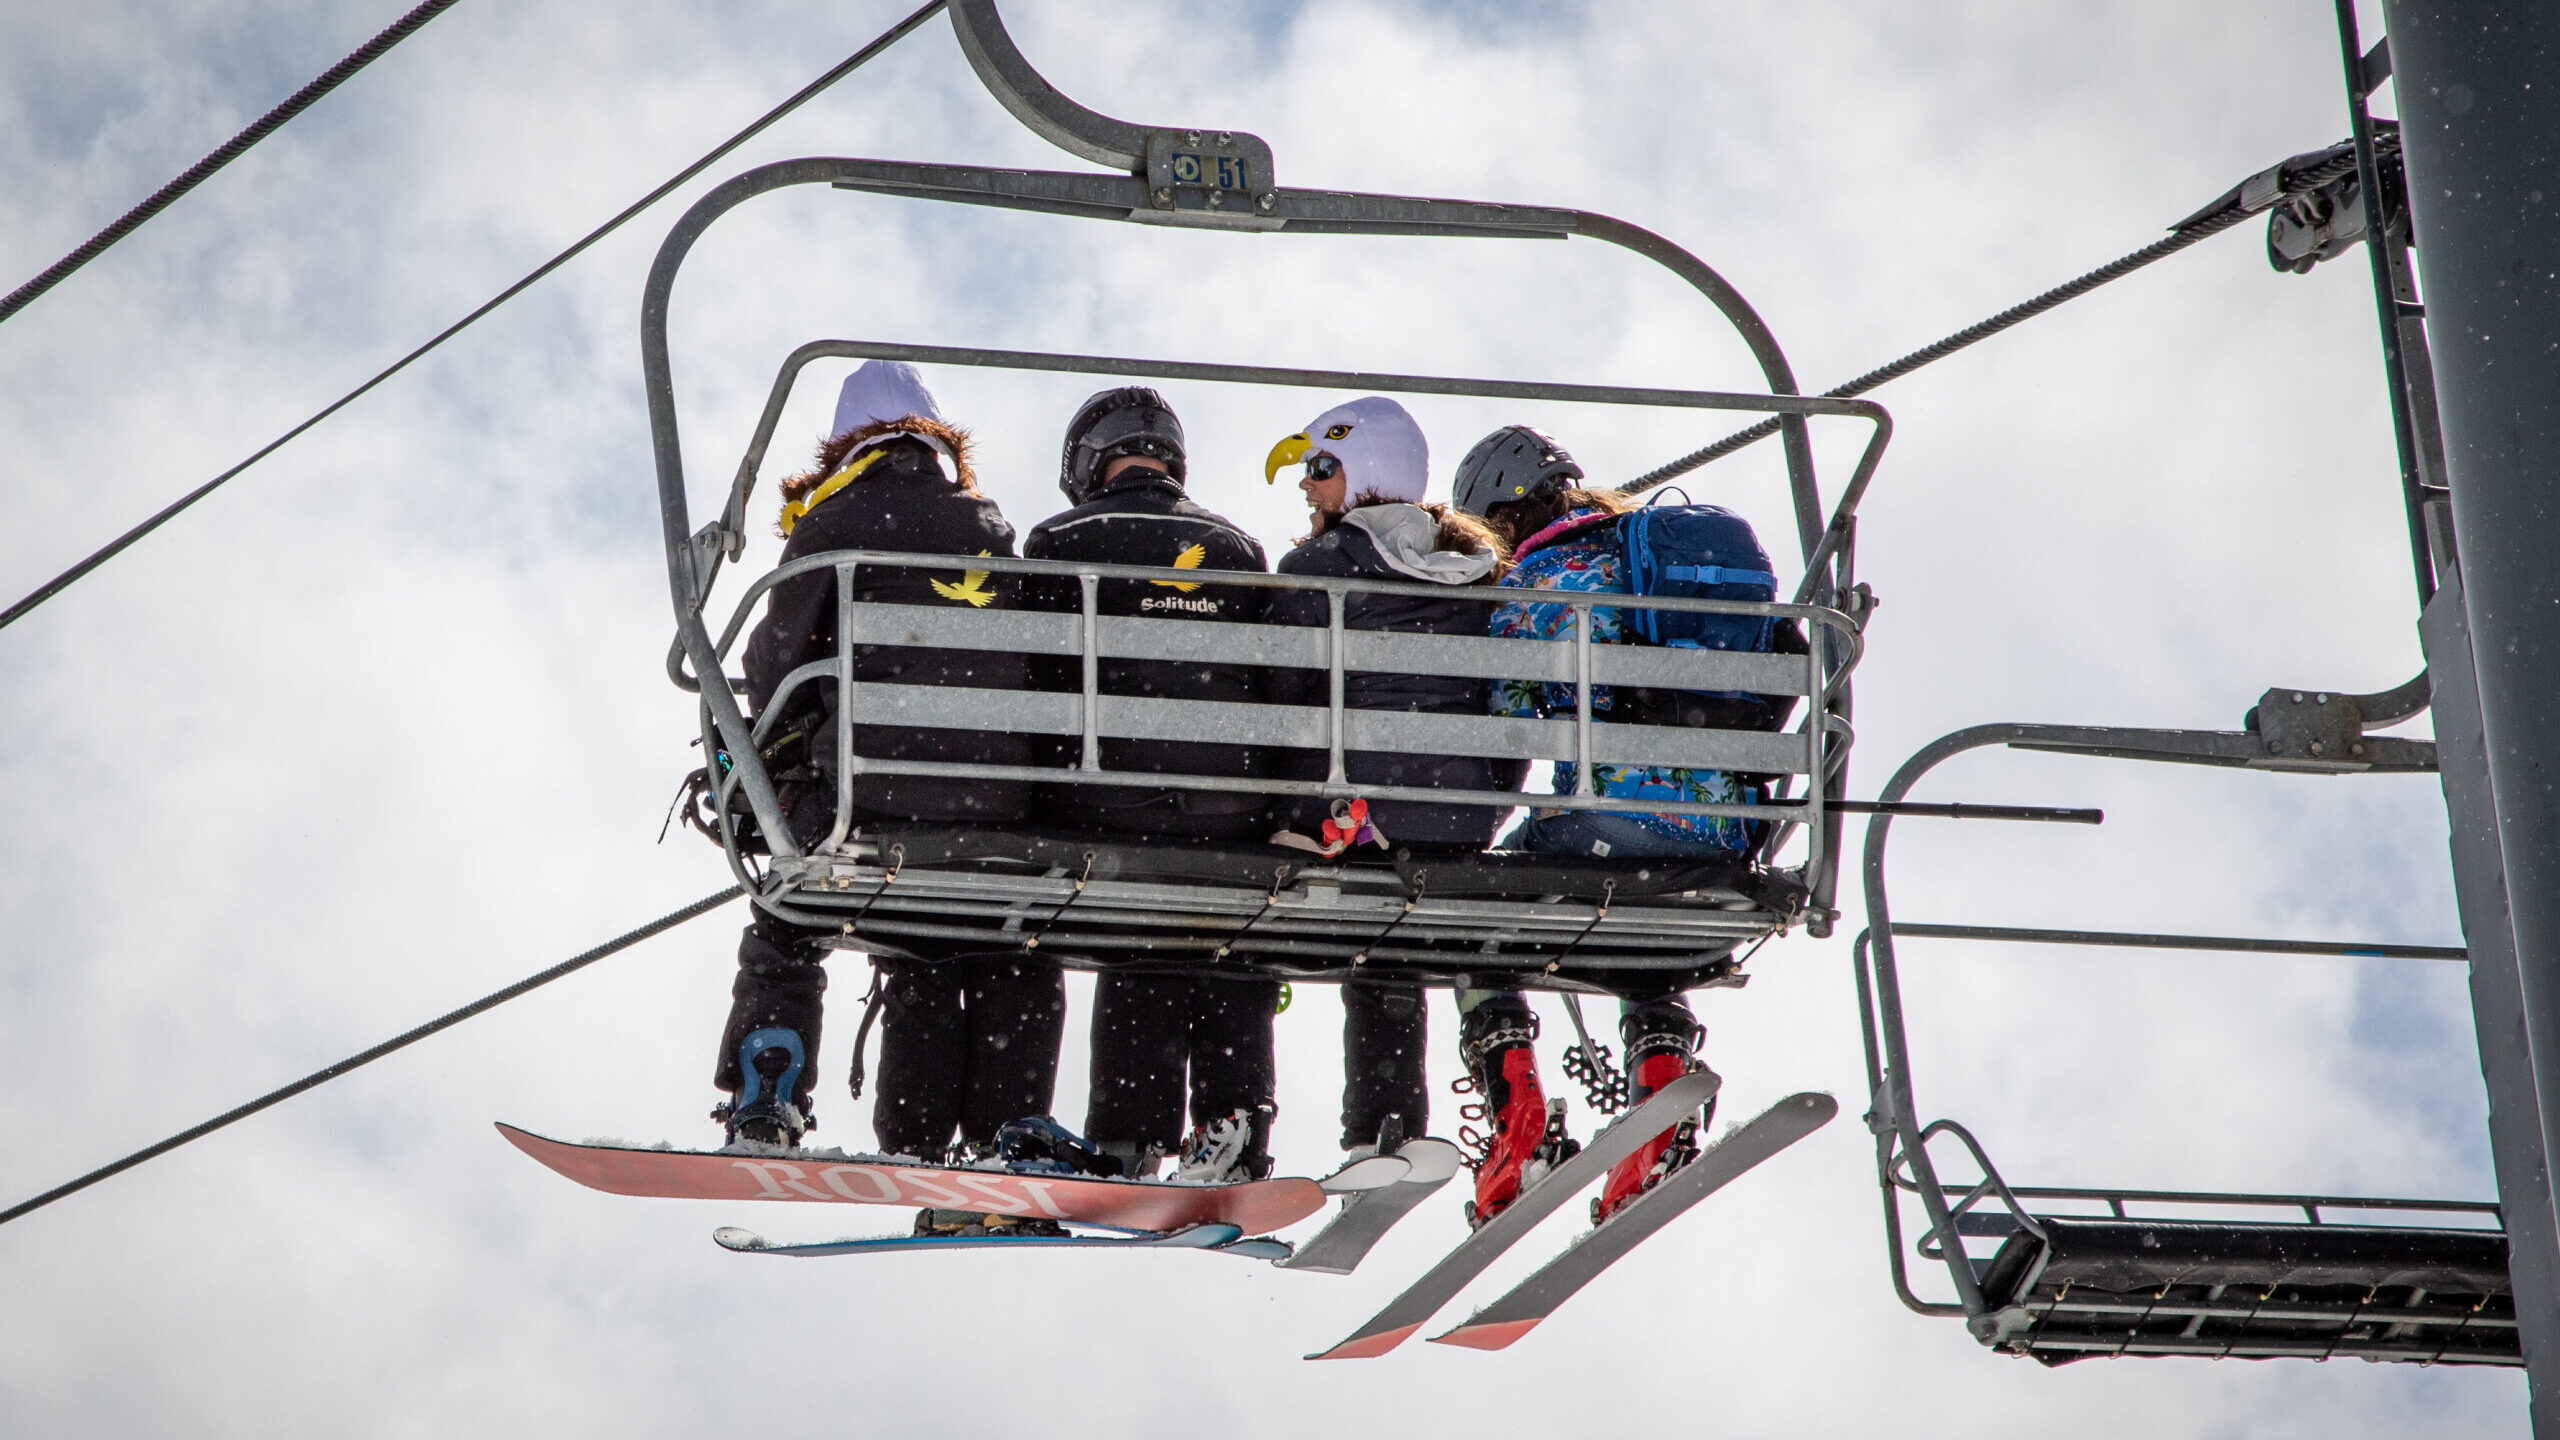 Skiers and snowboarders are seen riding on a ski lift....